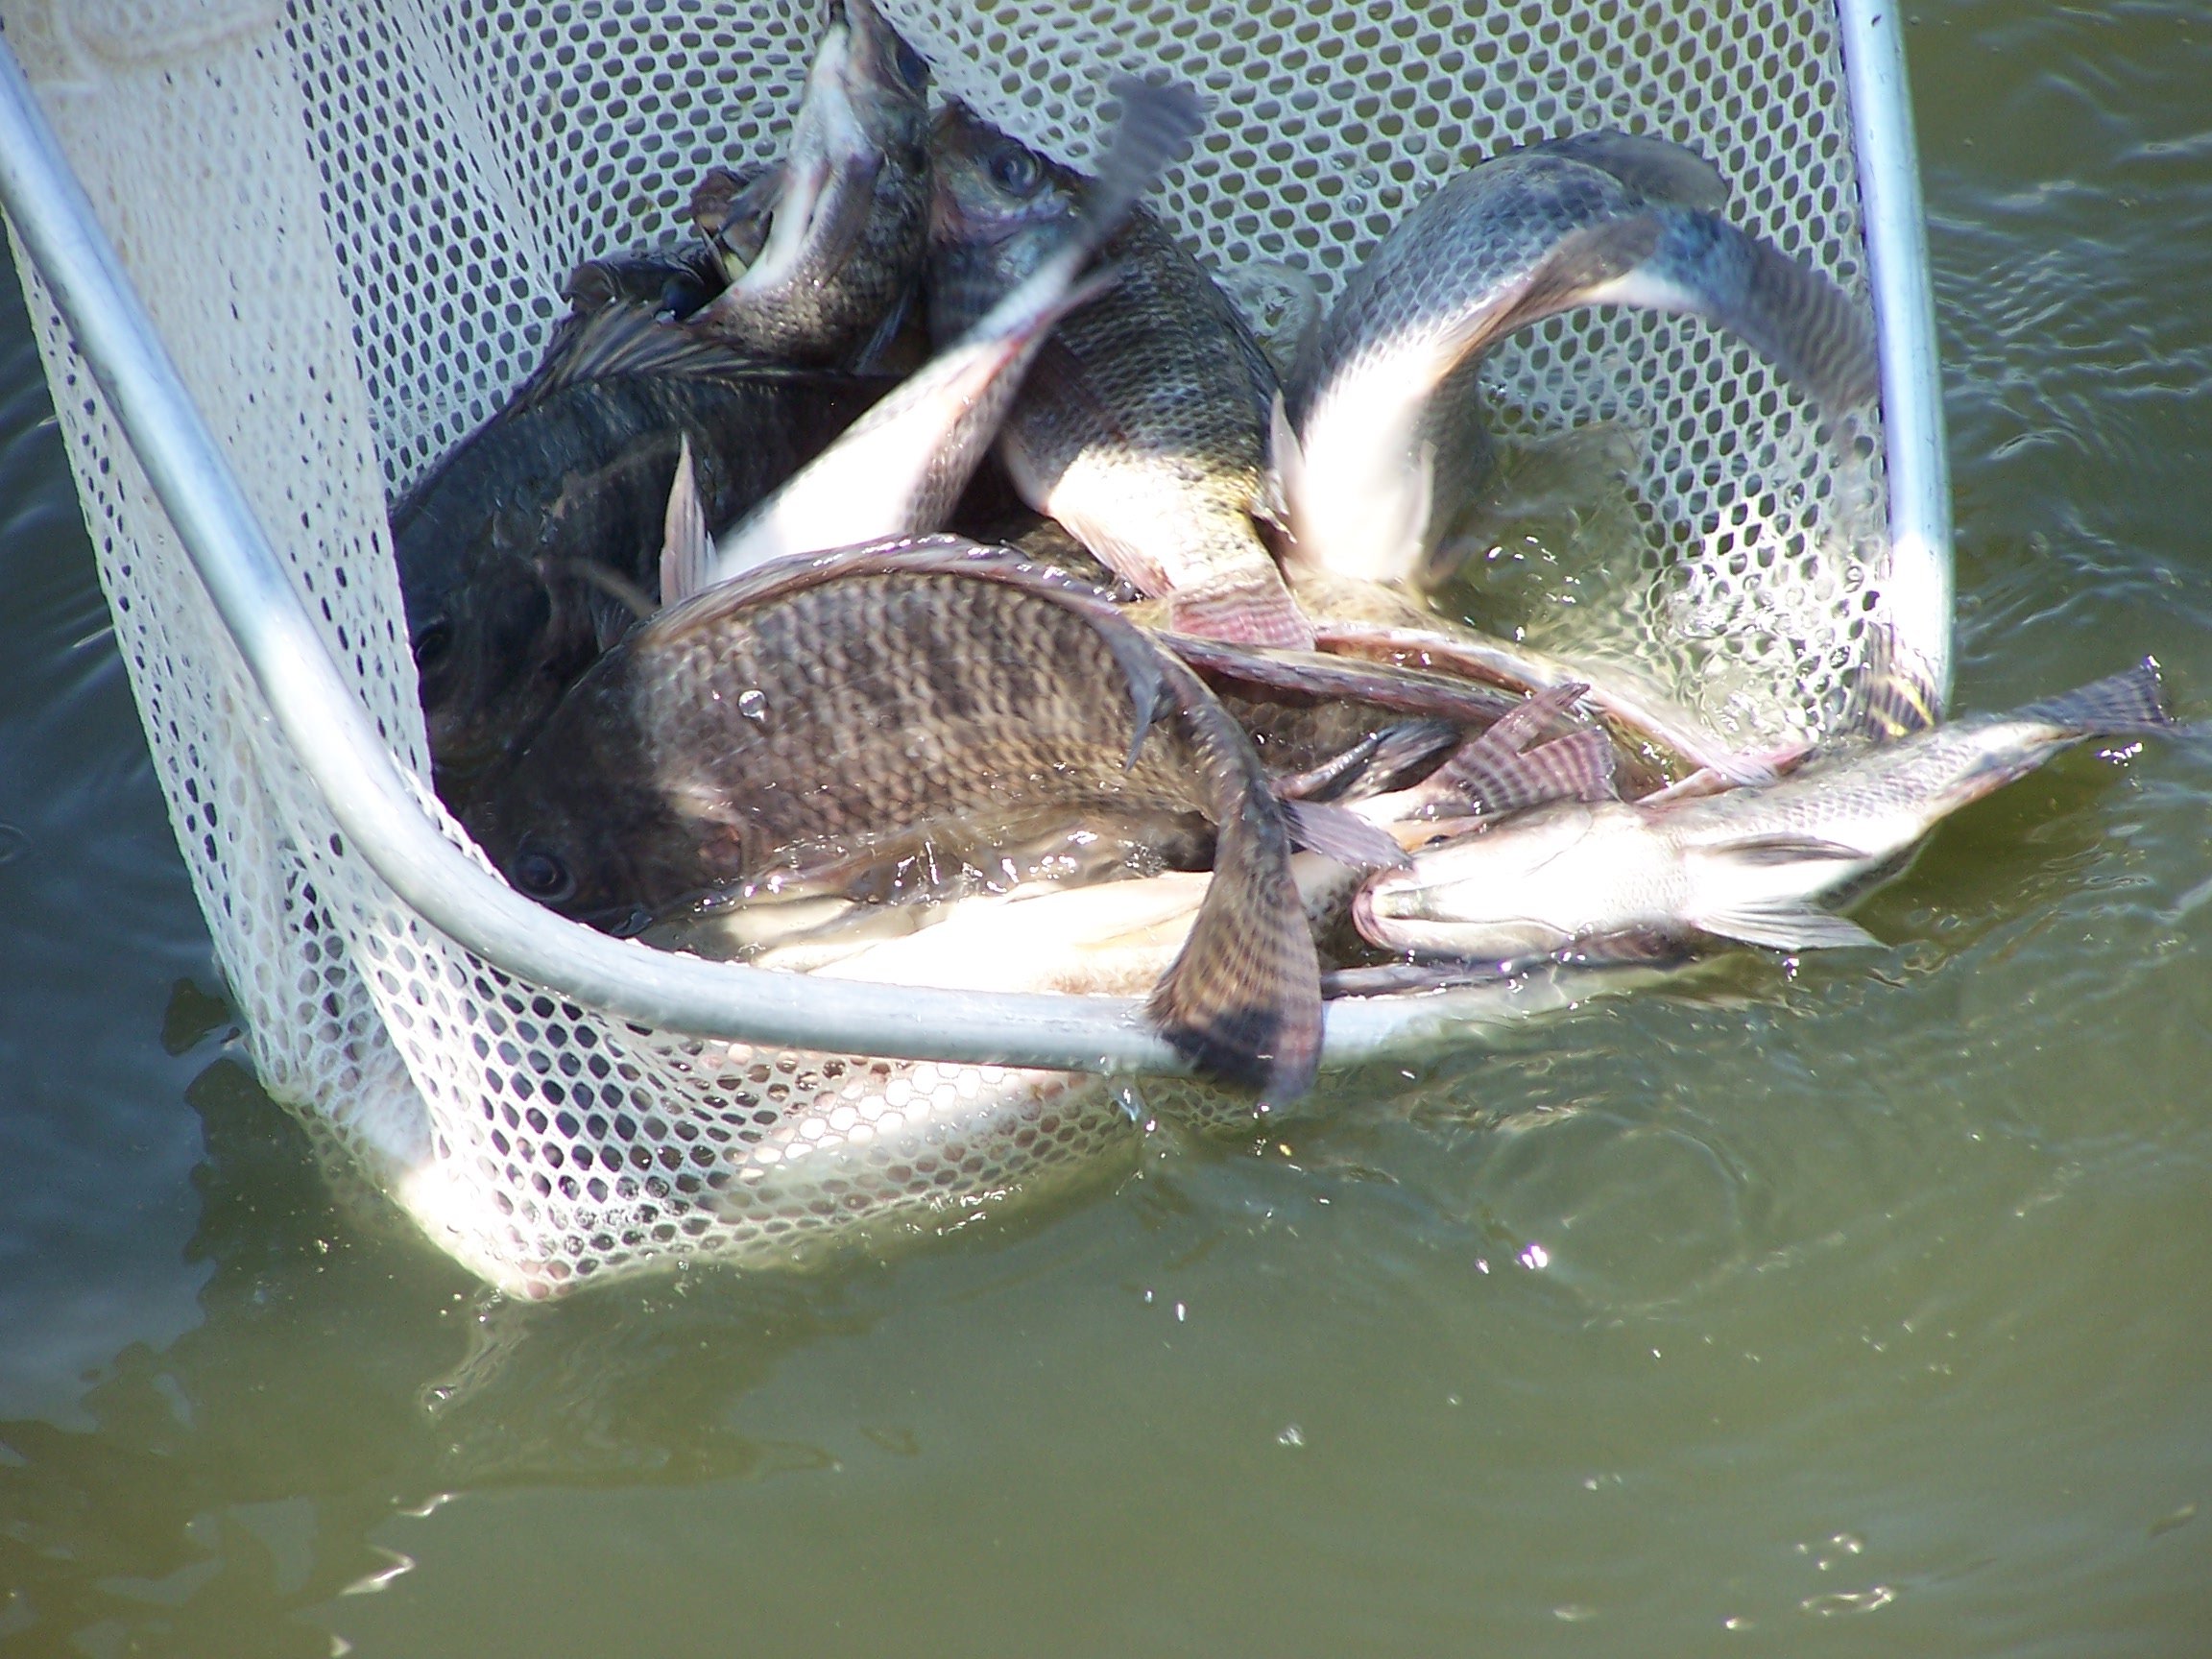 Fish being caught with a net